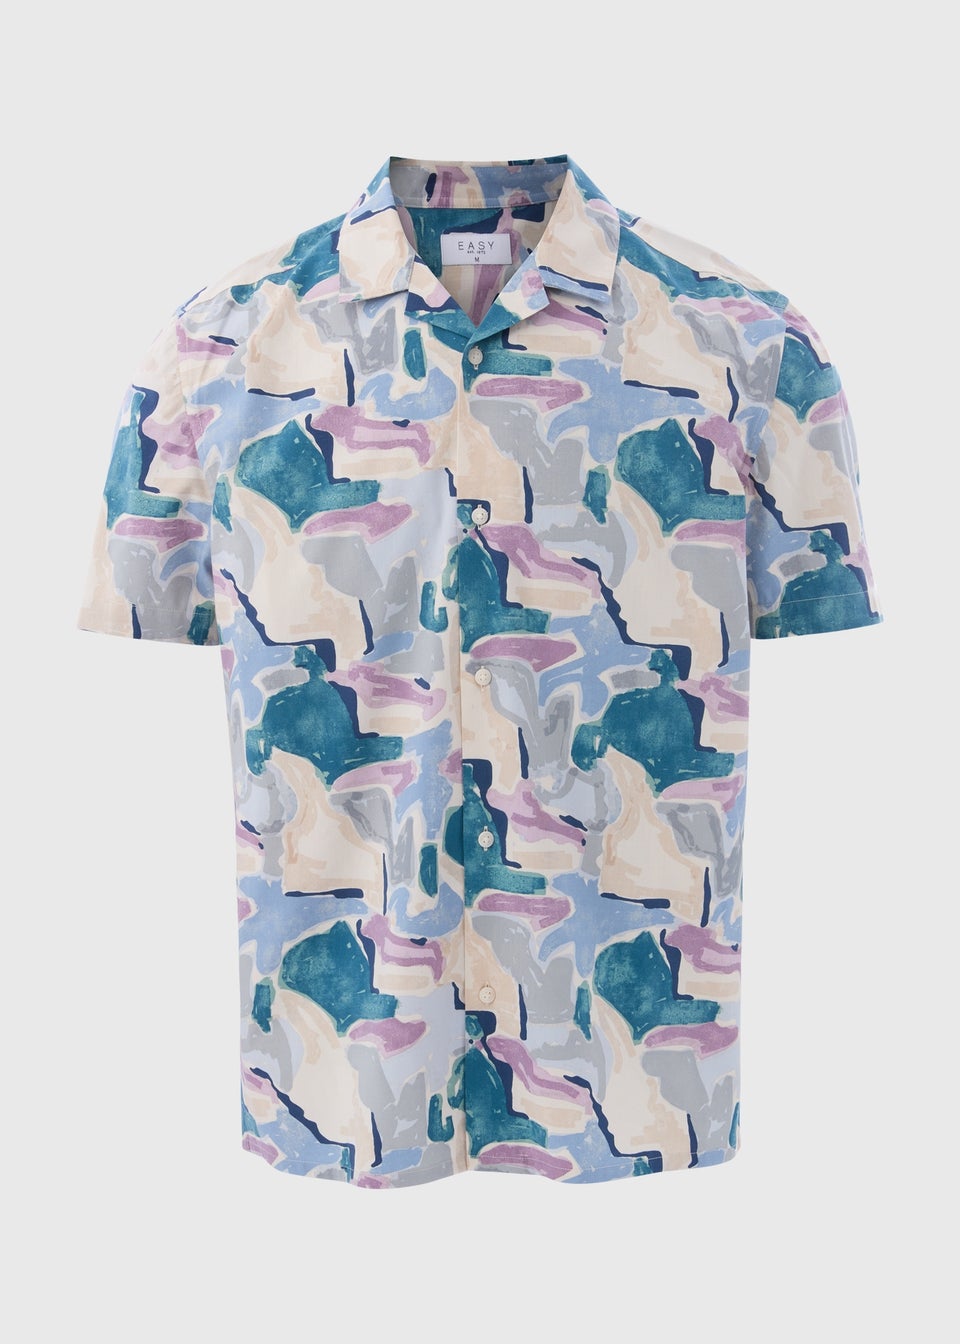 Multicolour Abstract Watercolour Shapes Shirt